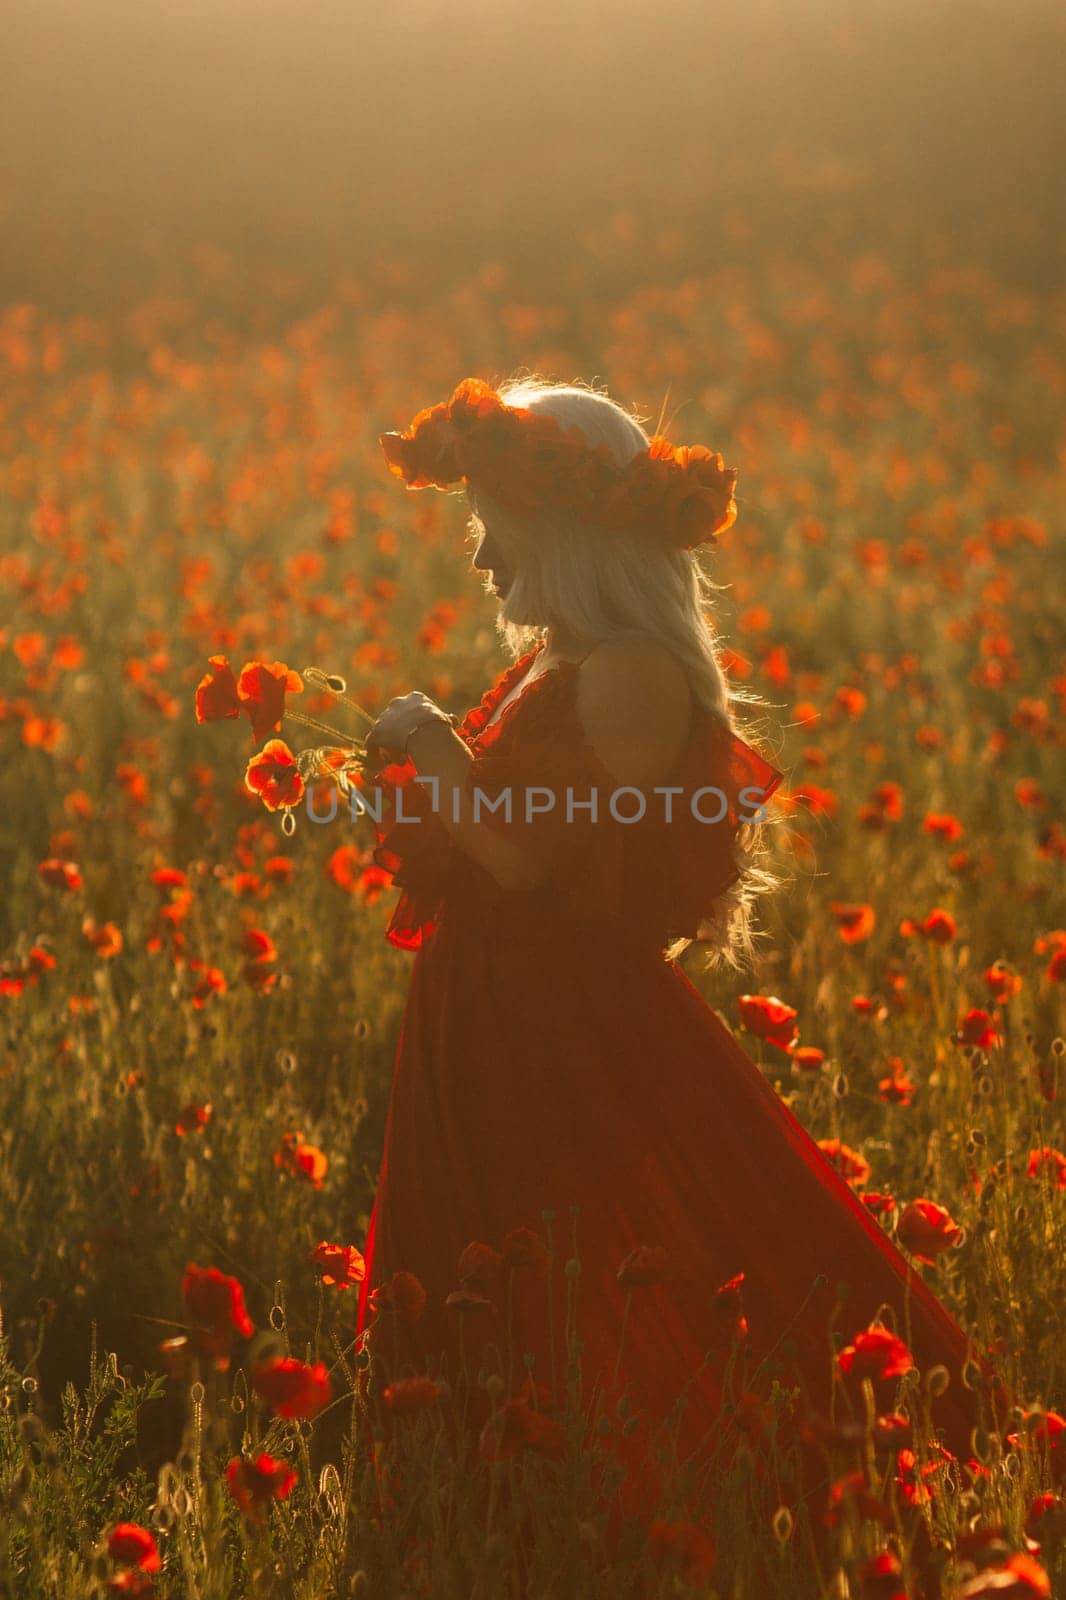 A woman in a red dress is standing in a field of red flowers. She is holding a flower in her hand and wearing a flower crown. The scene is serene and peaceful